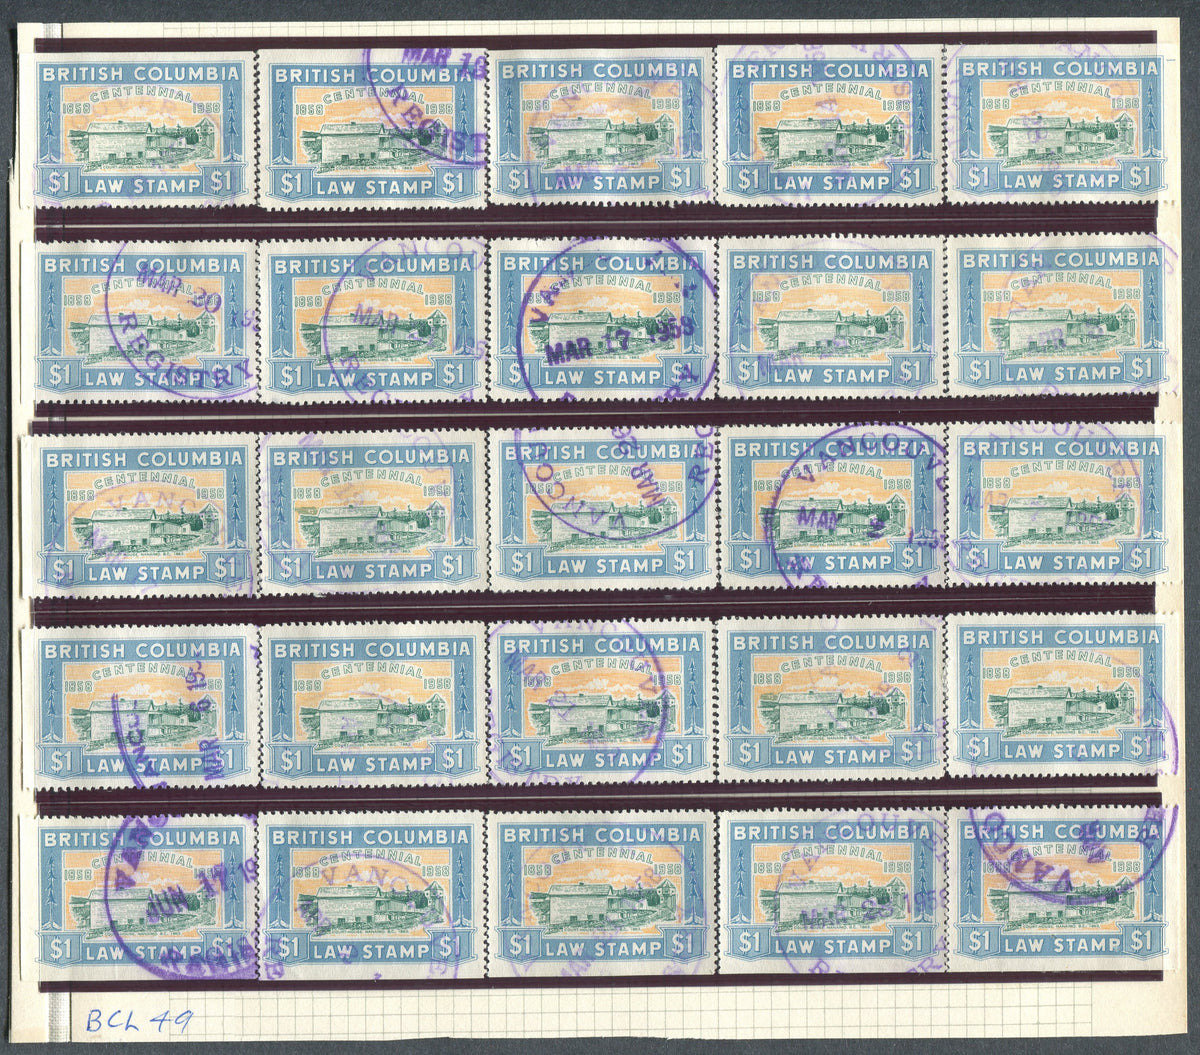 0049BC1709 - BCL49 - Used Reconstructed Sheet